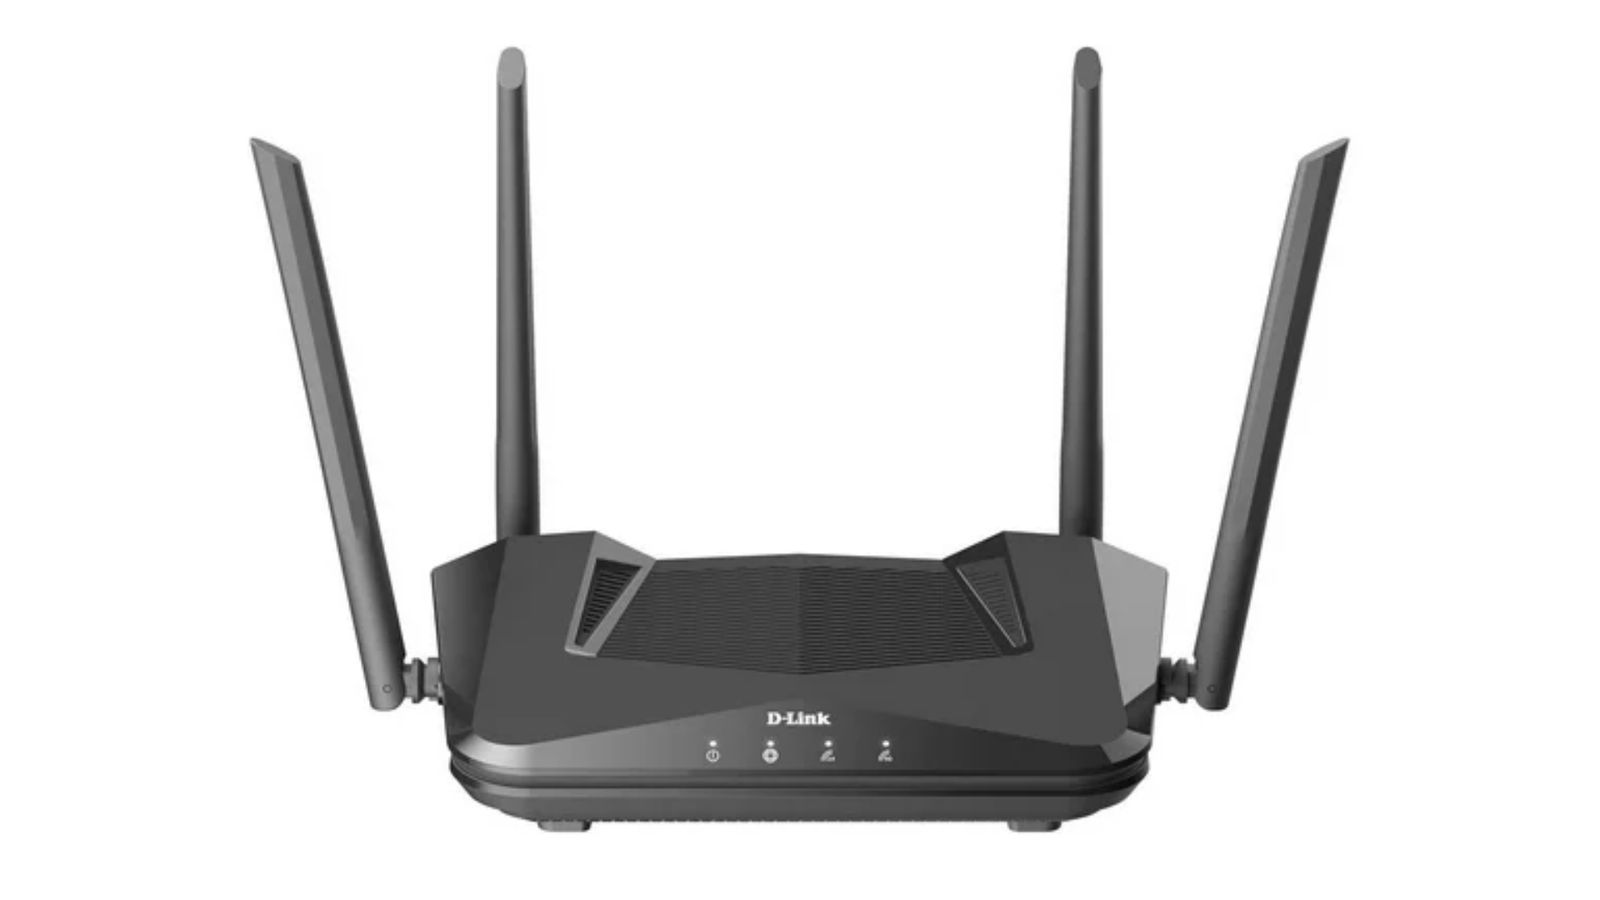 D-Link EXO AX1800 product image of a black router featuring four antenna stick out the sides.